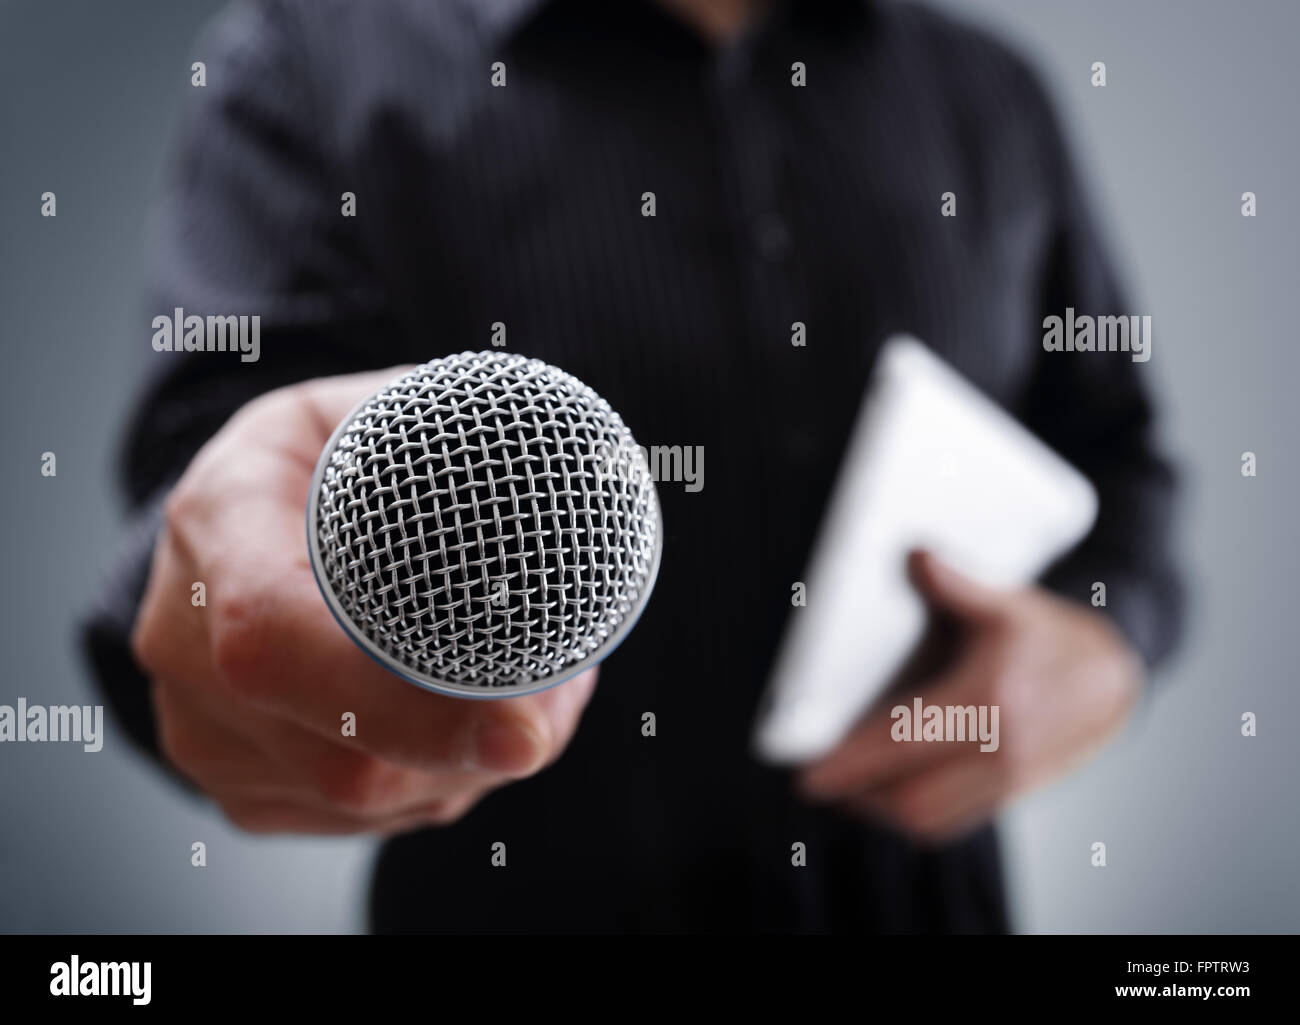 Hand holding a microphone conducting a business interview or press conference Stock Photo